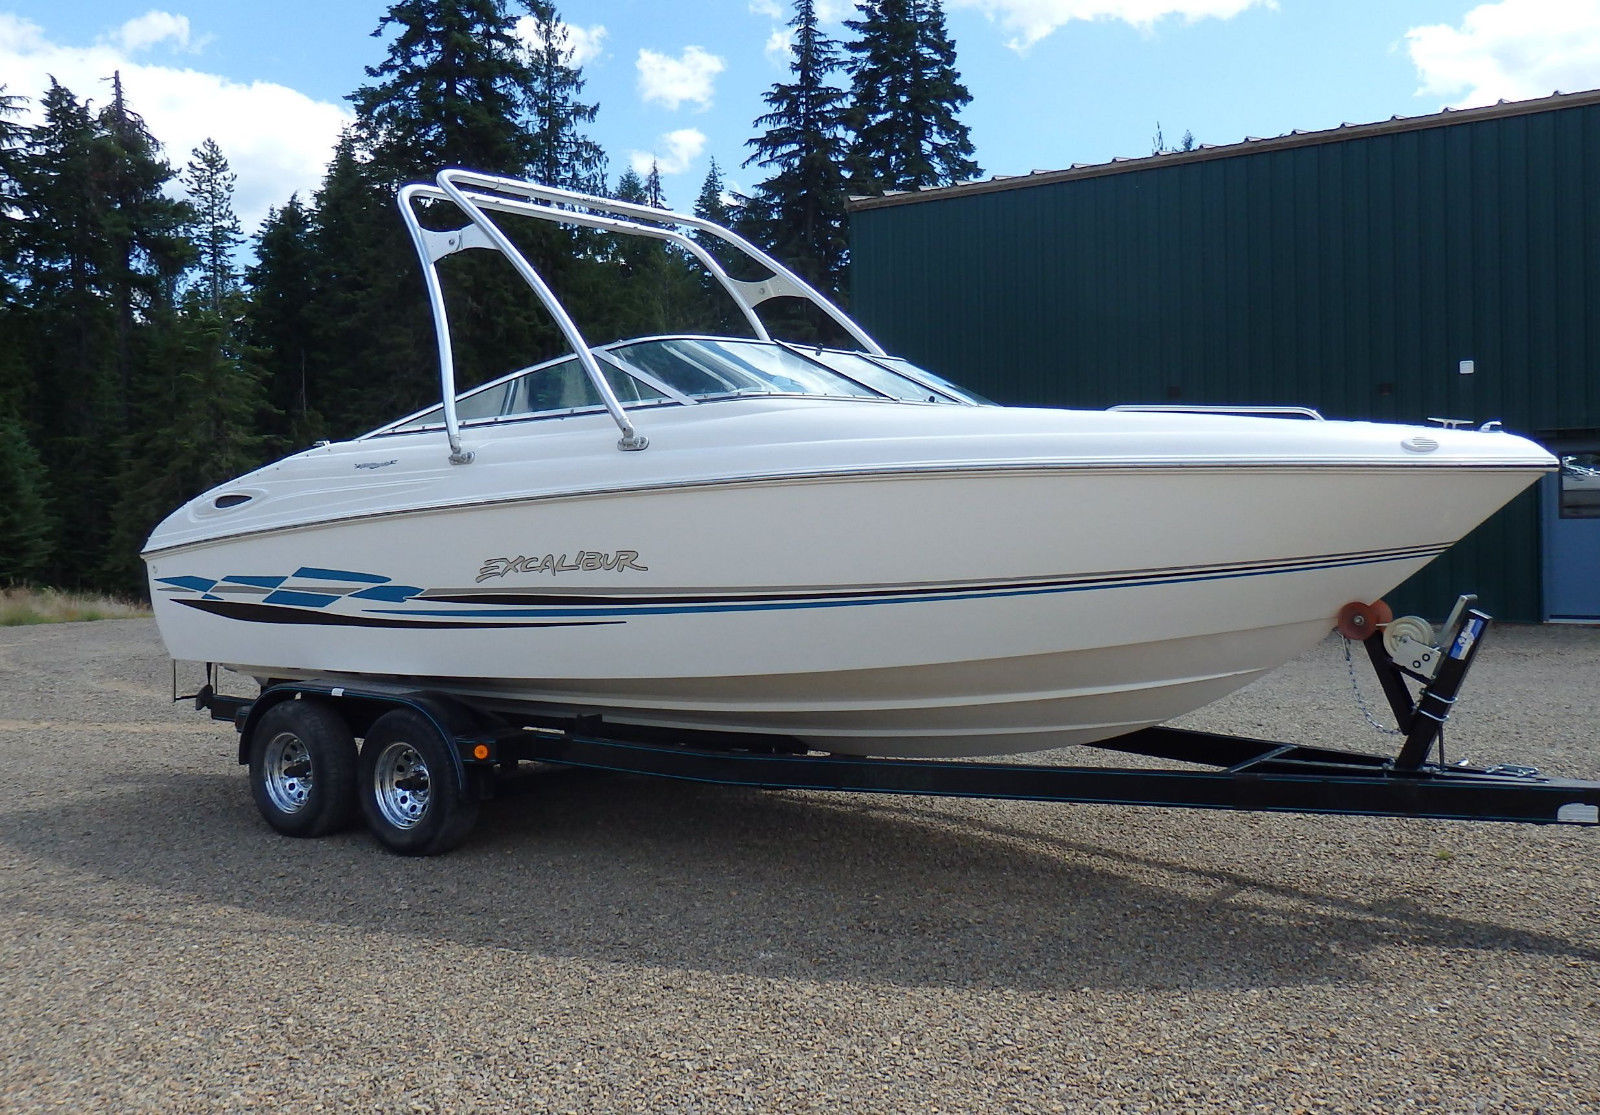 Wellcraft Excalibur 23 SCS 2000 for sale for $16,500 - Boats-from-USA.com